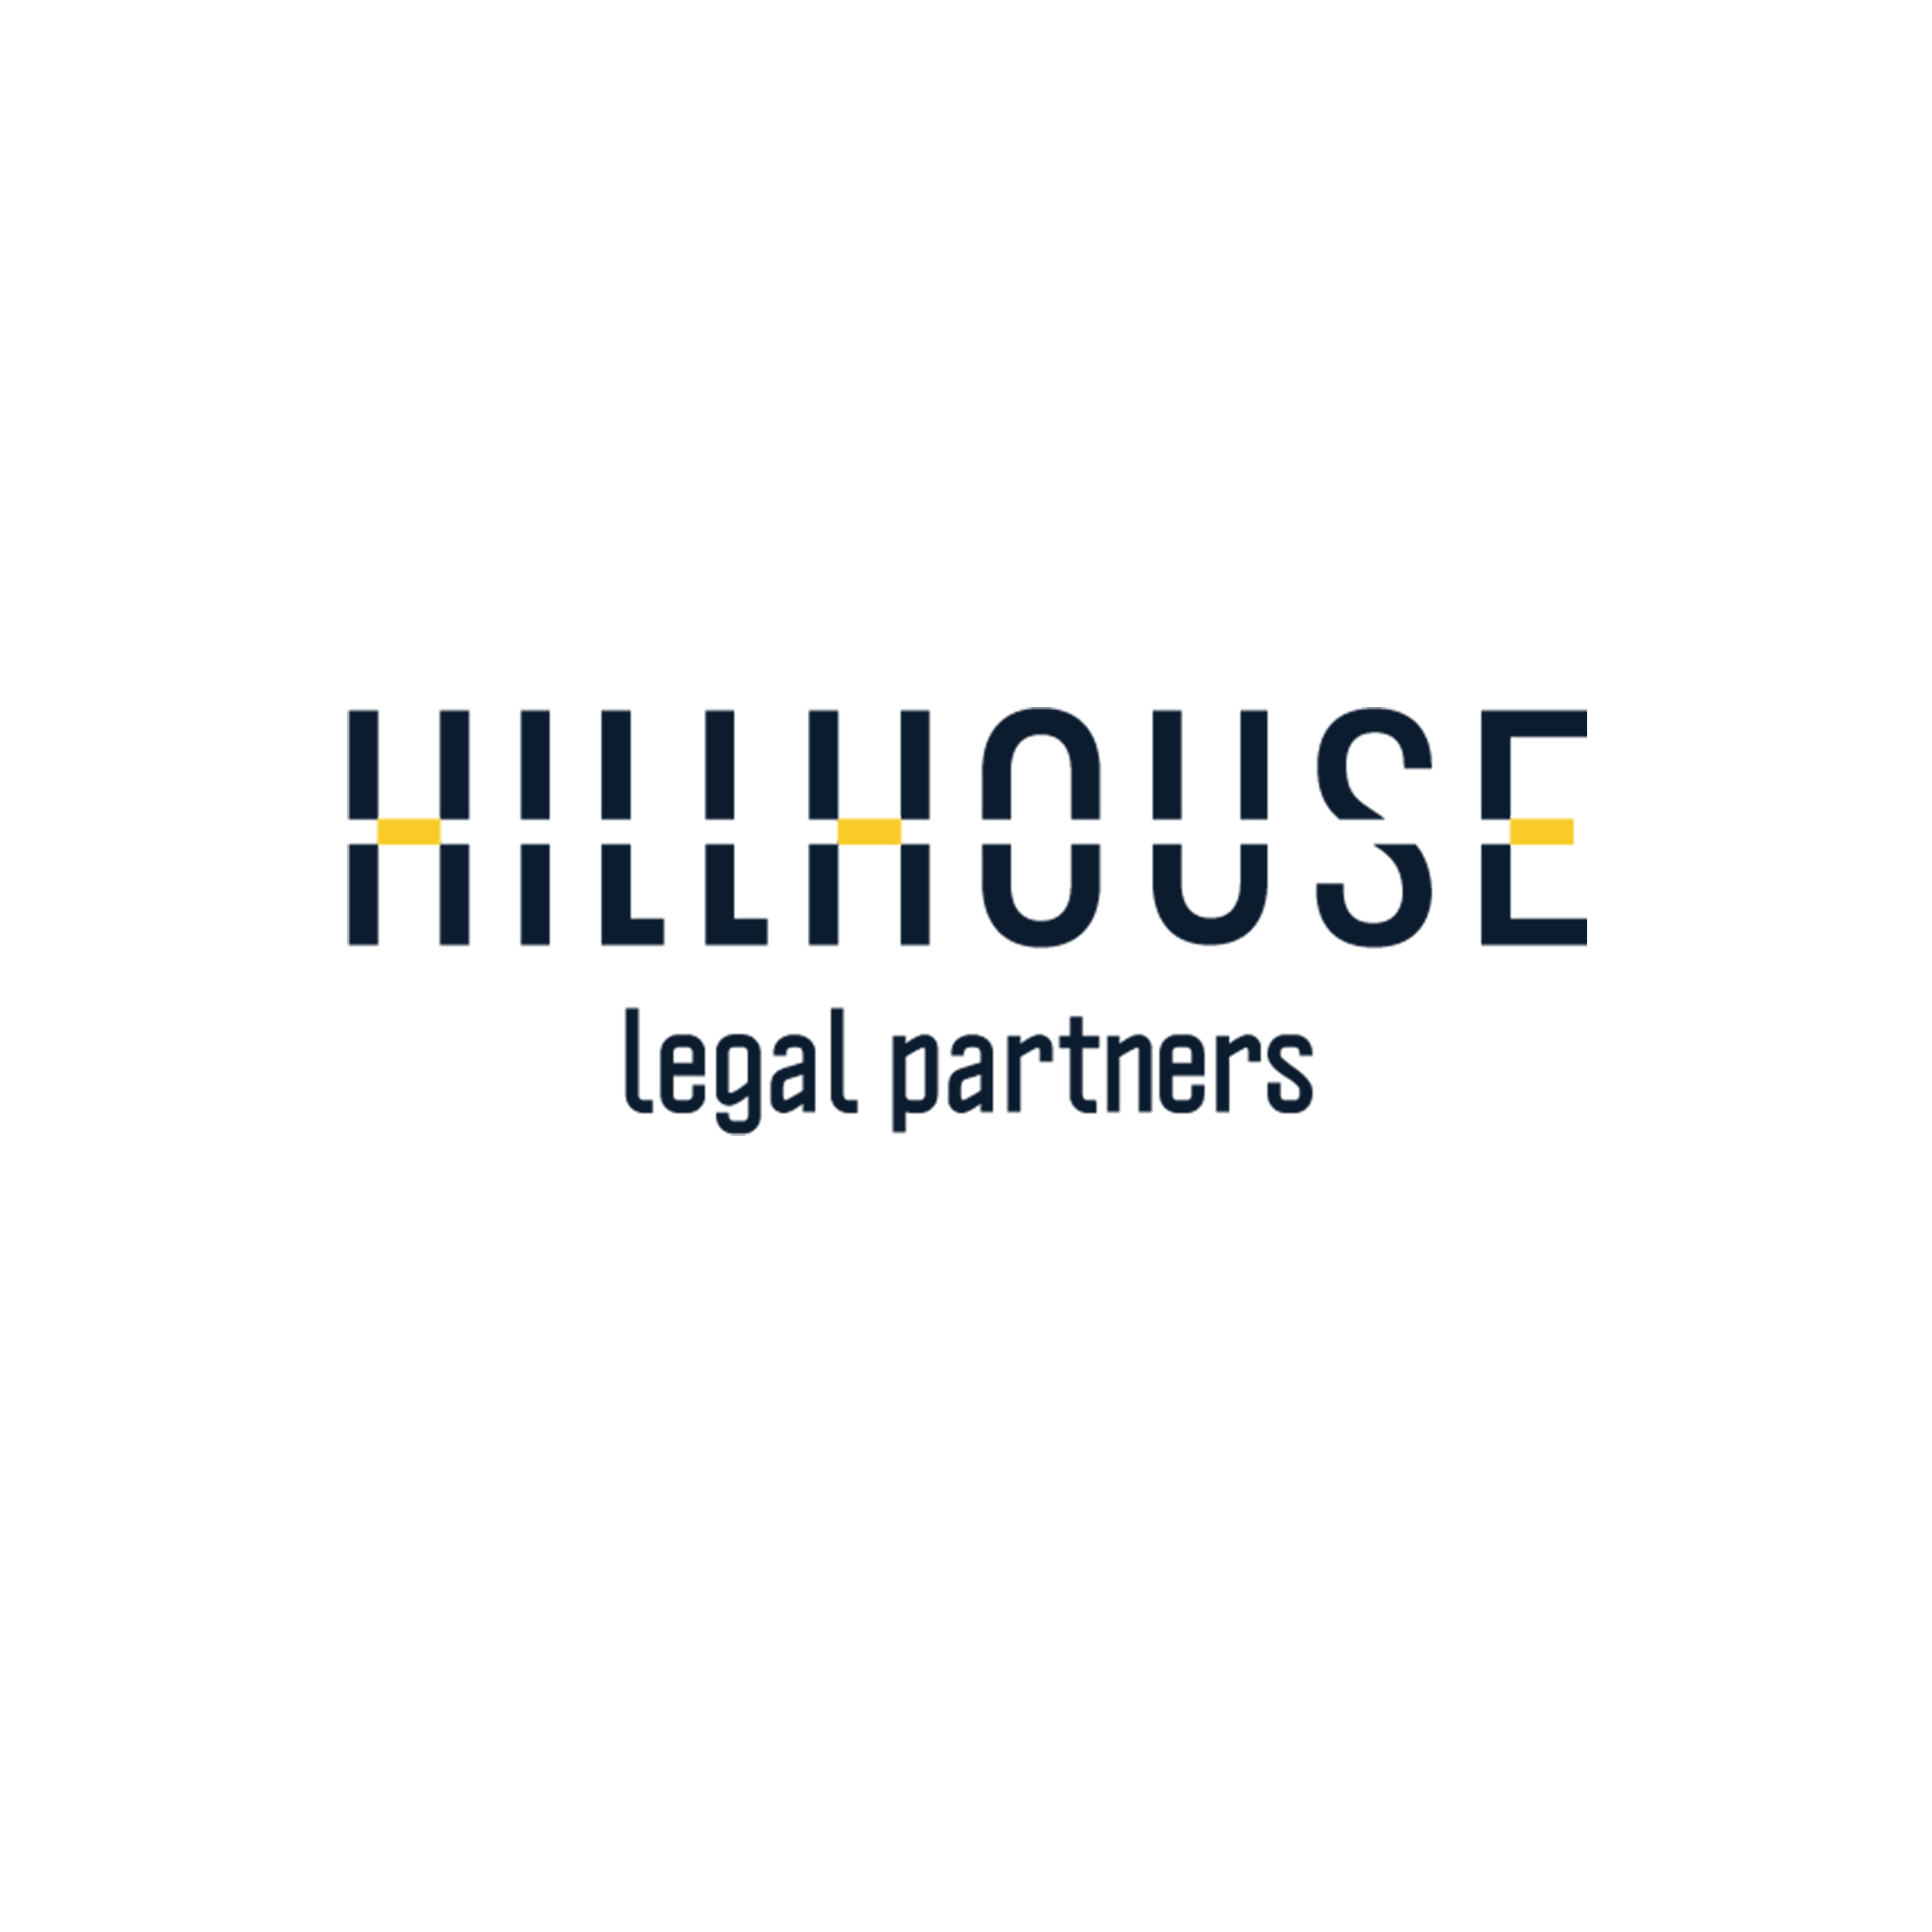 Hillhouse Legal Partners | The Coffee Commune